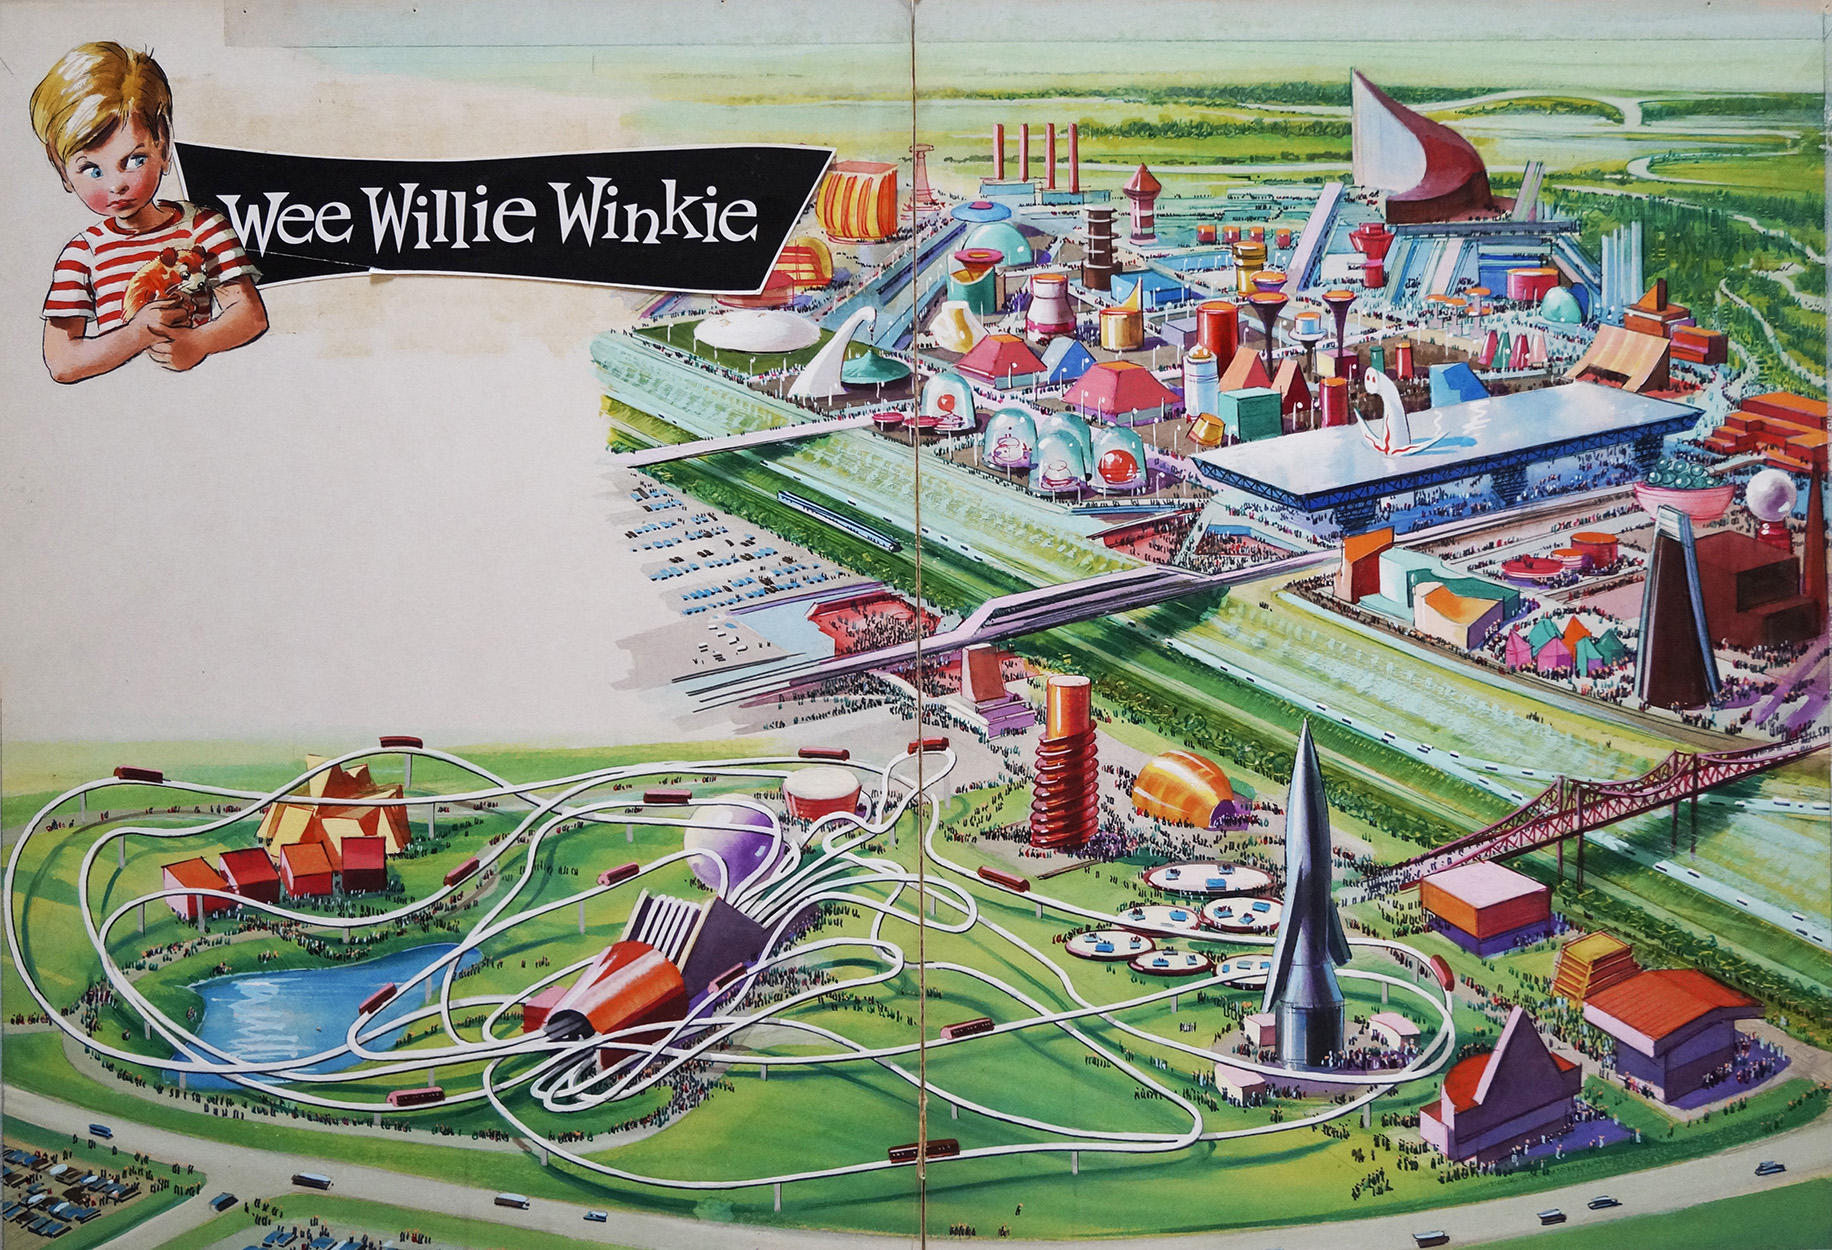 Cities of The Future (Original) art by Wee Willie Winkie (Worsley) at The Illustration Art Gallery